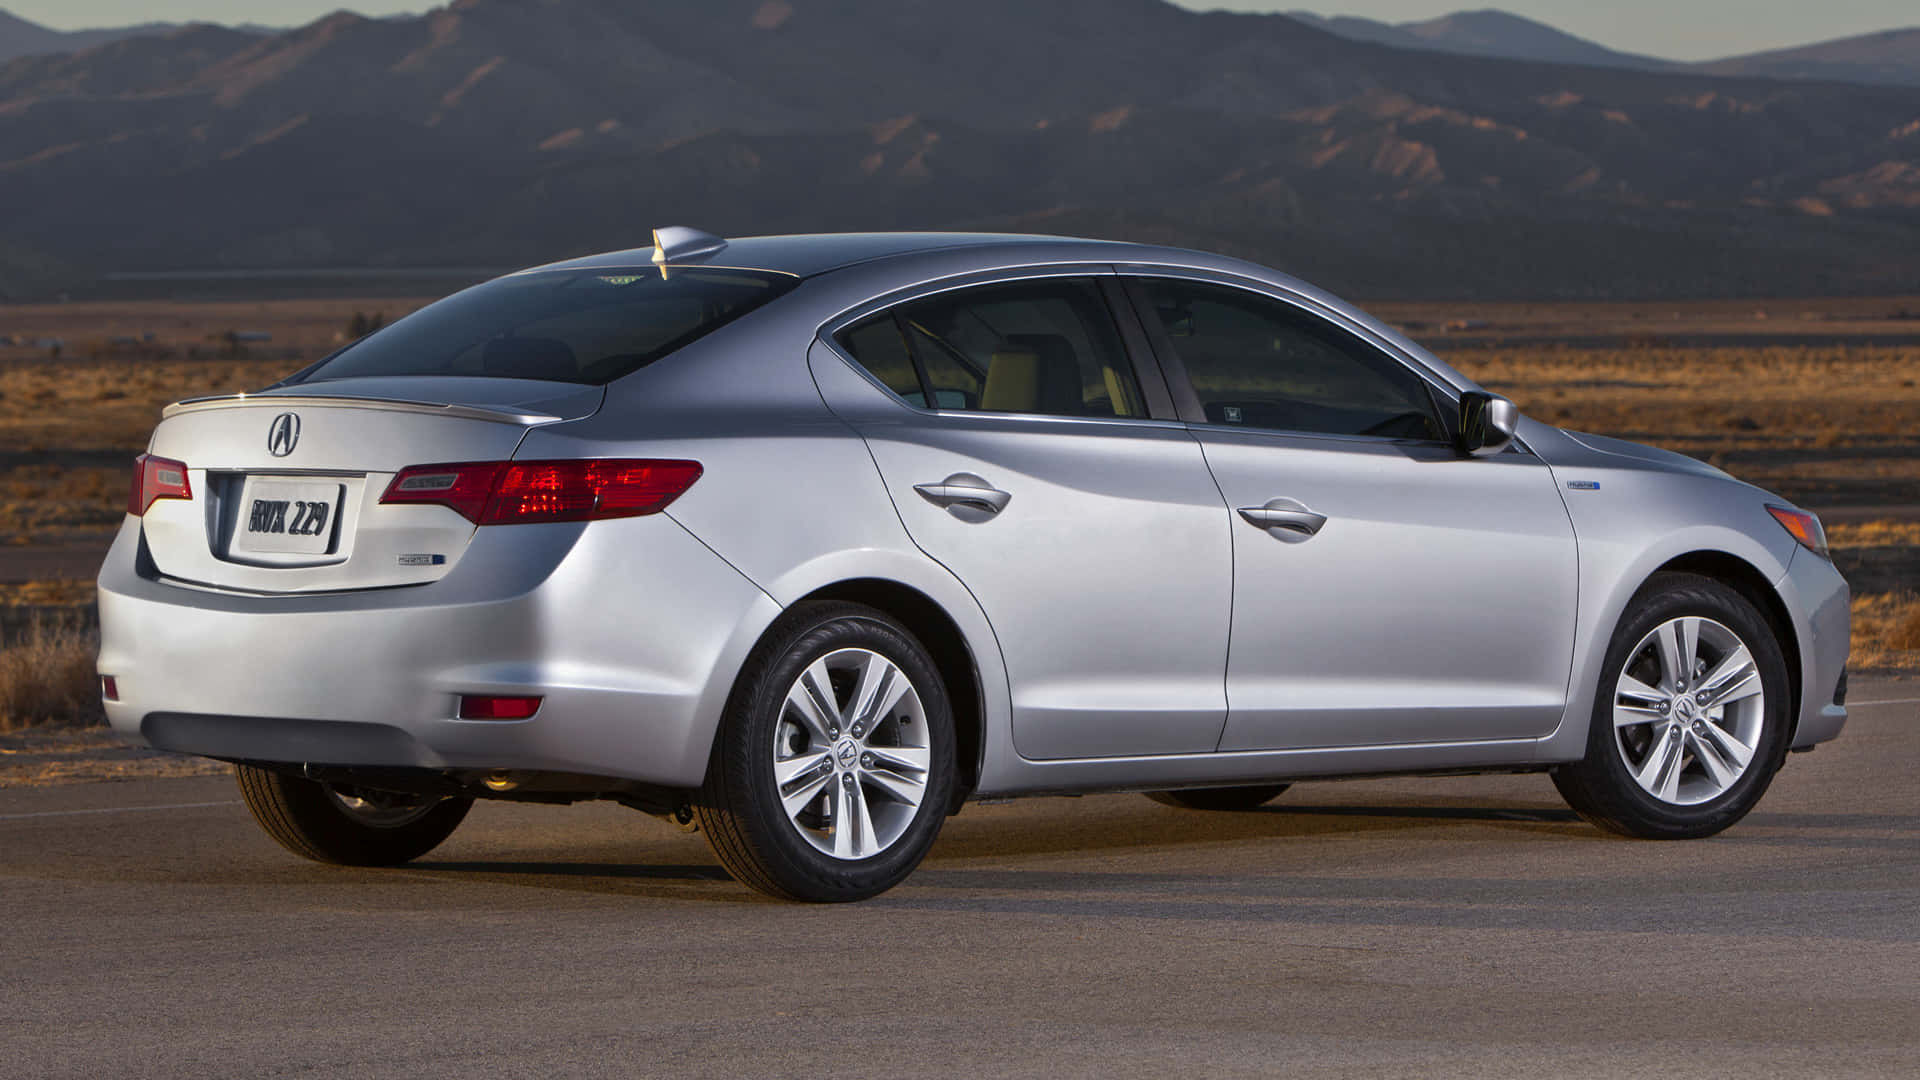 Sleek Acura ILX parked on a scenic mountain road with a picturesque backdrop Wallpaper